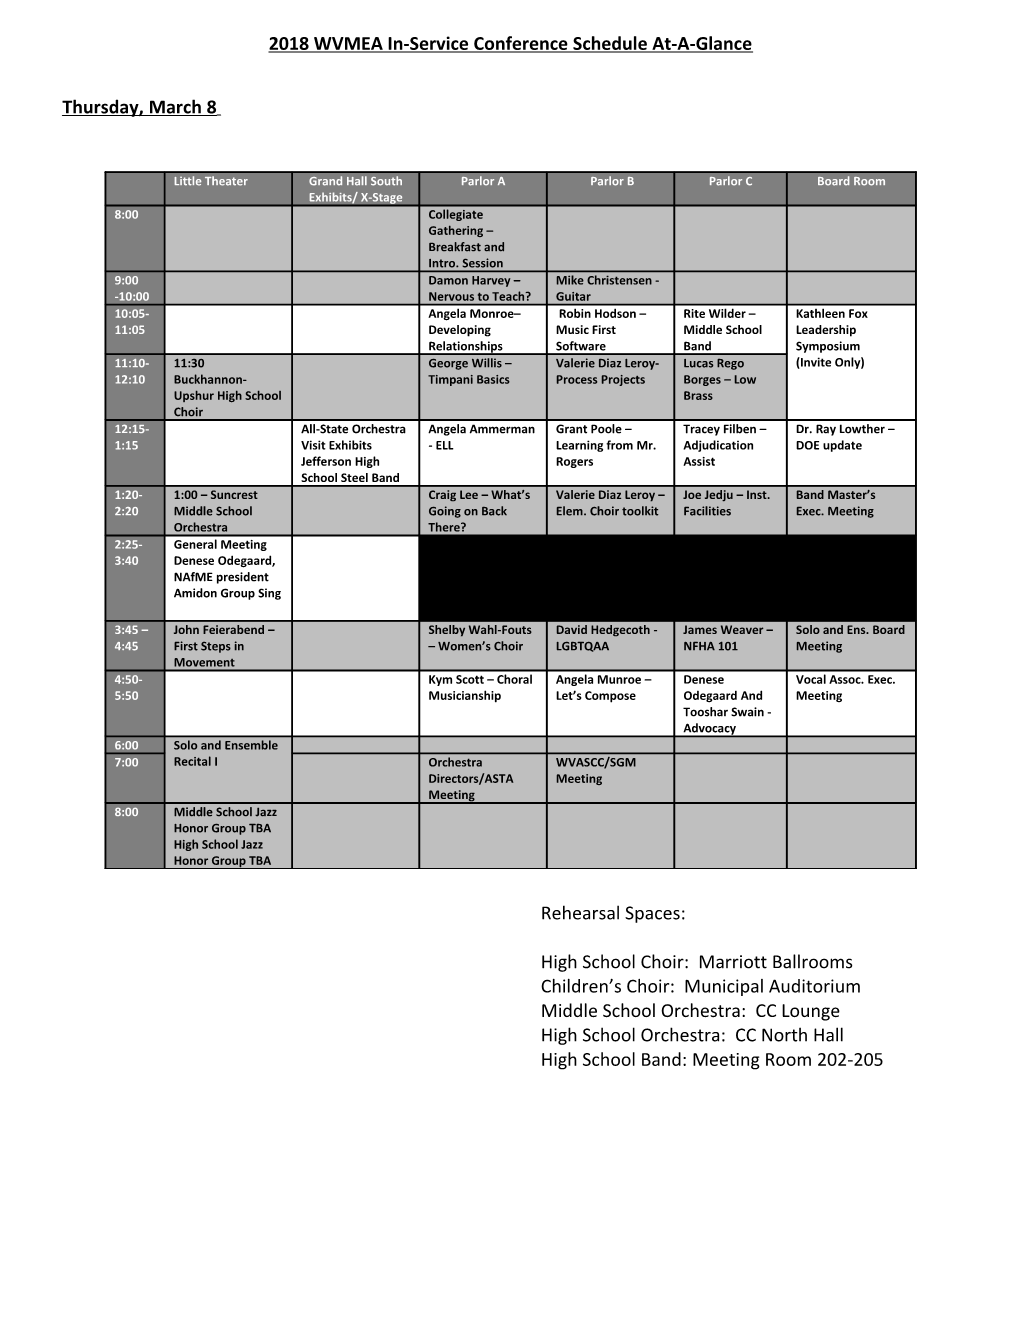 2018 WVMEA In-Service Conference Schedule At-A-Glance